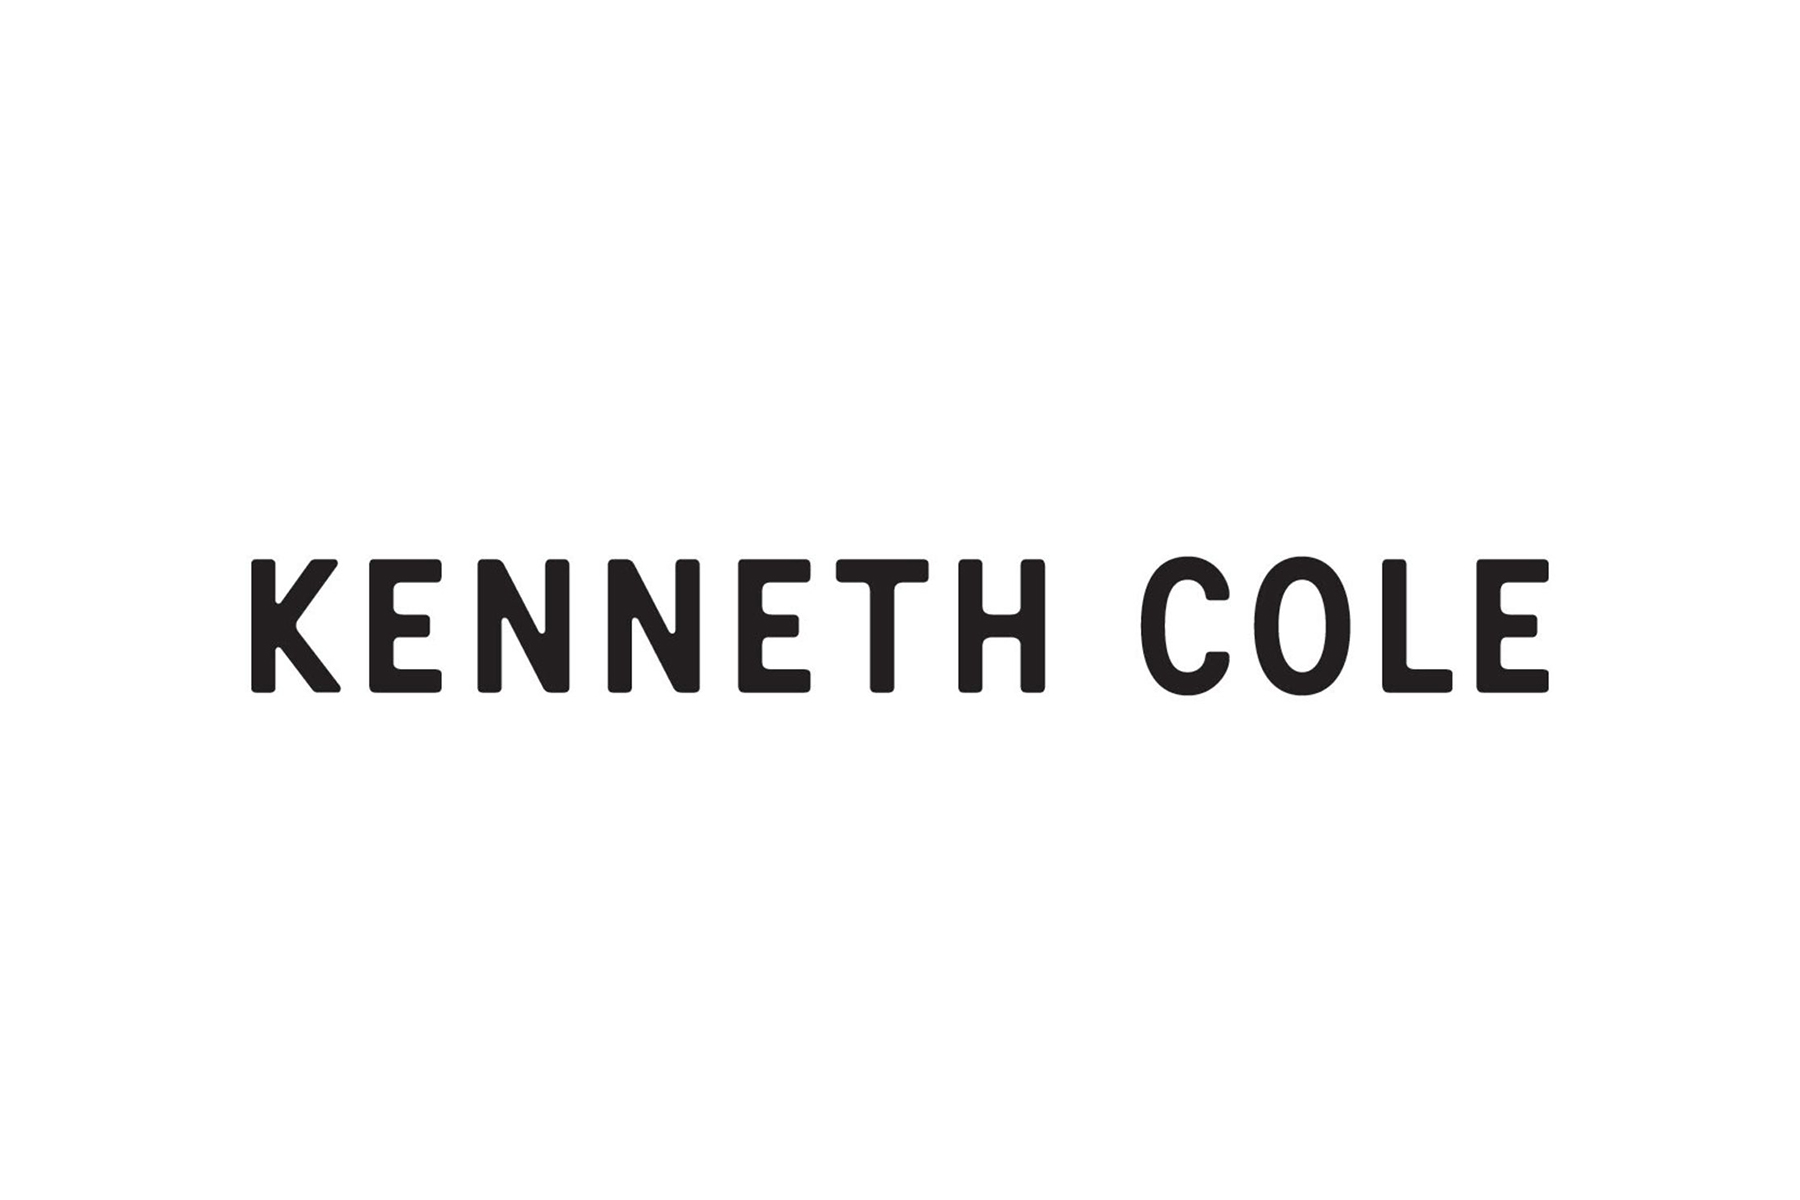 KENNETH COLE